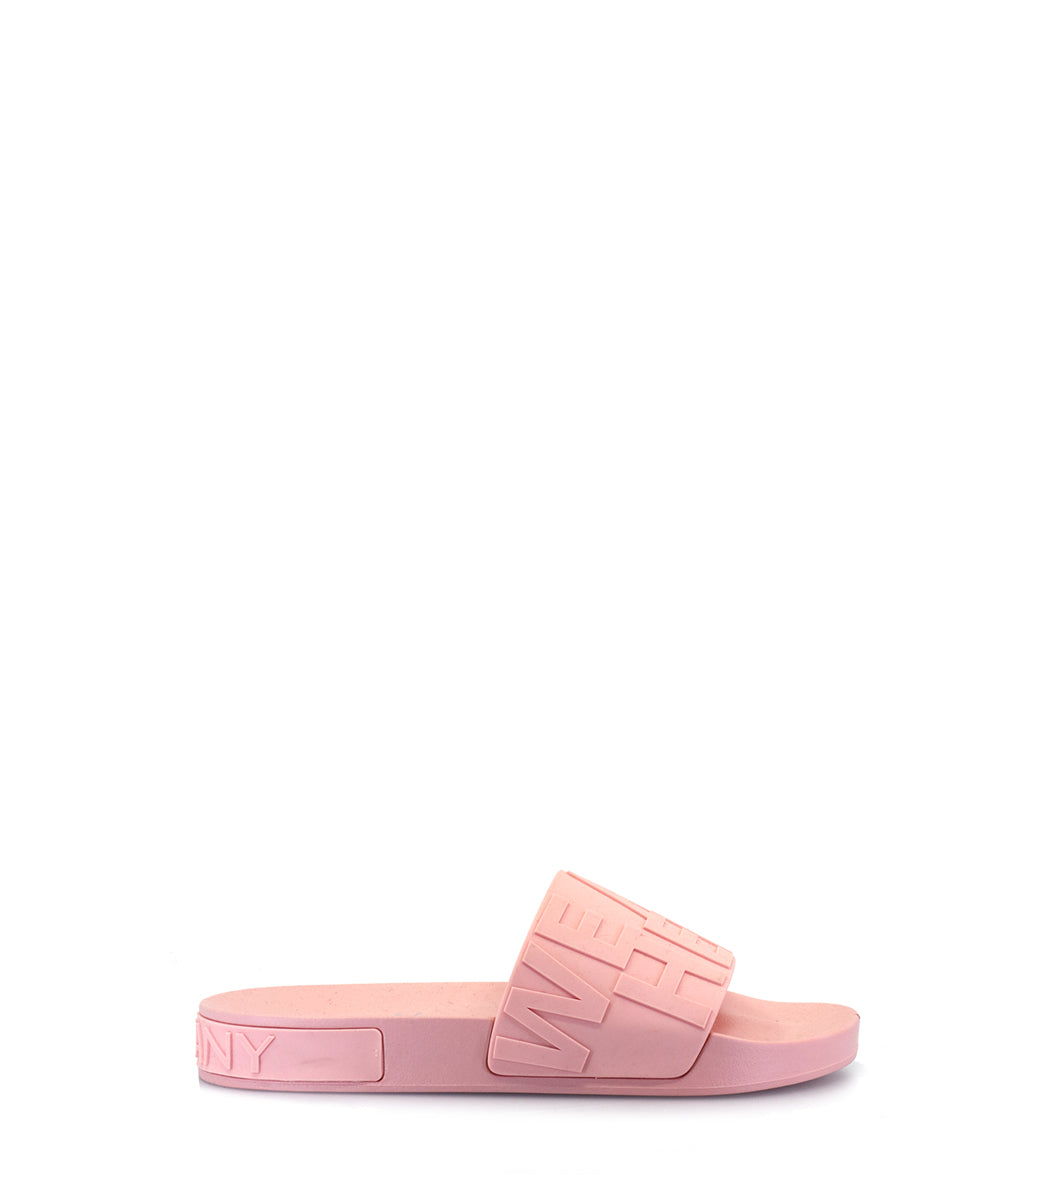 HERE PINK SANDALS